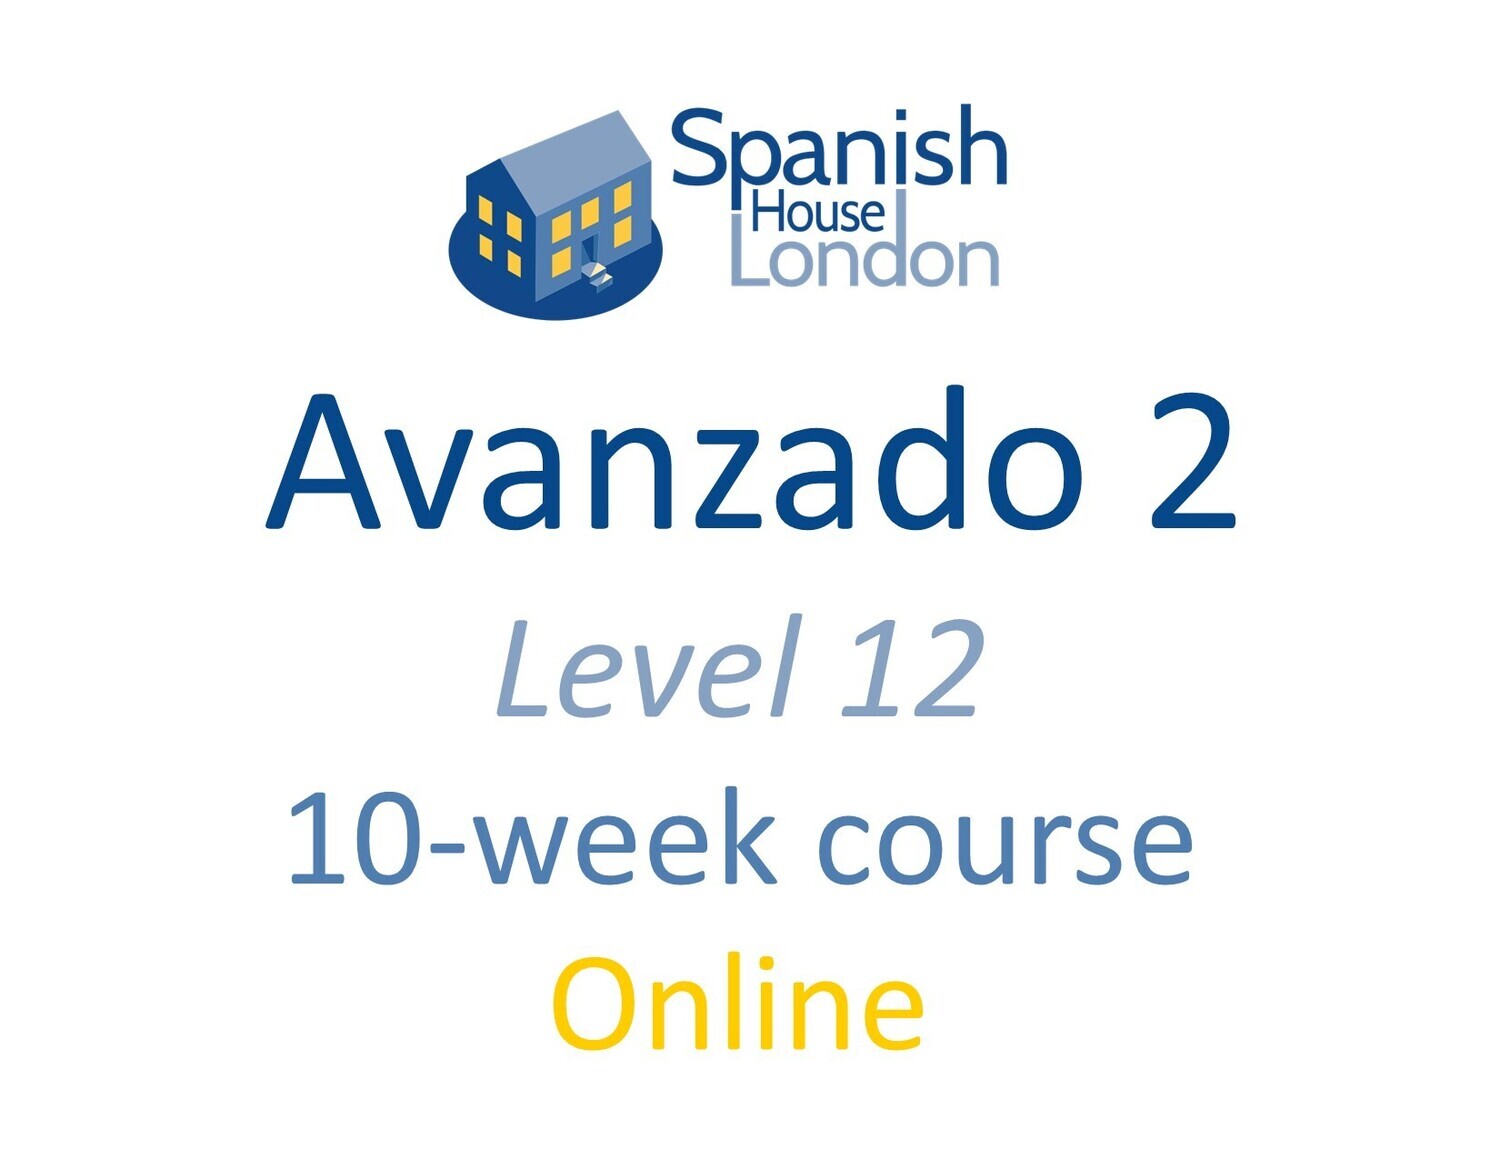 Avanzado 2 Course starting on 4th January at 6pm